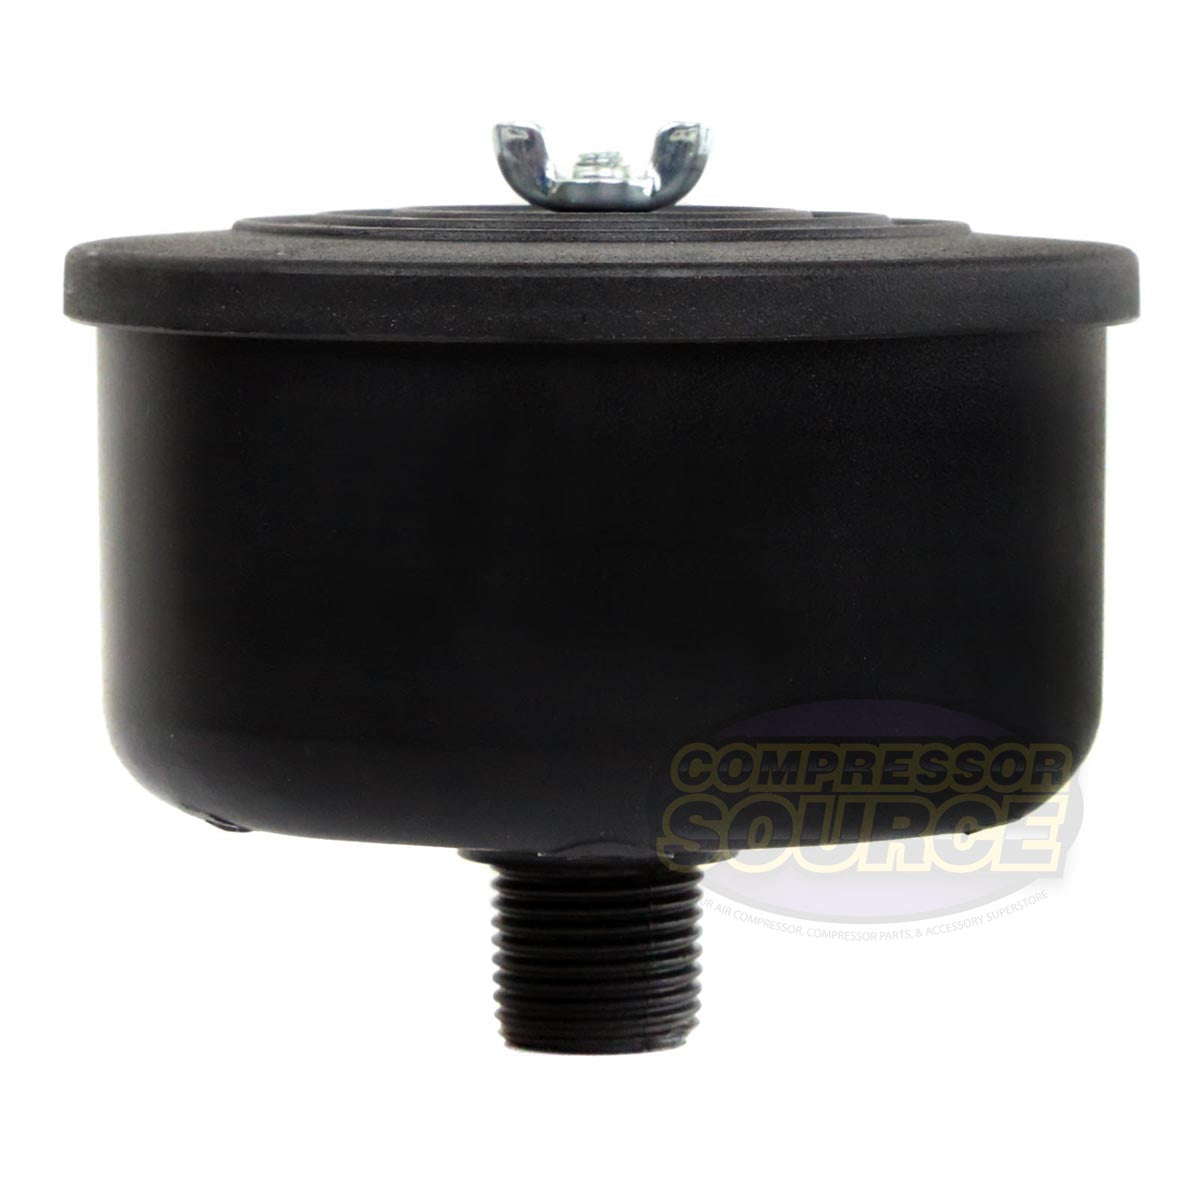 New 1/2" Puma Air Compressor Intake Replacement Filter And Plastic Housing